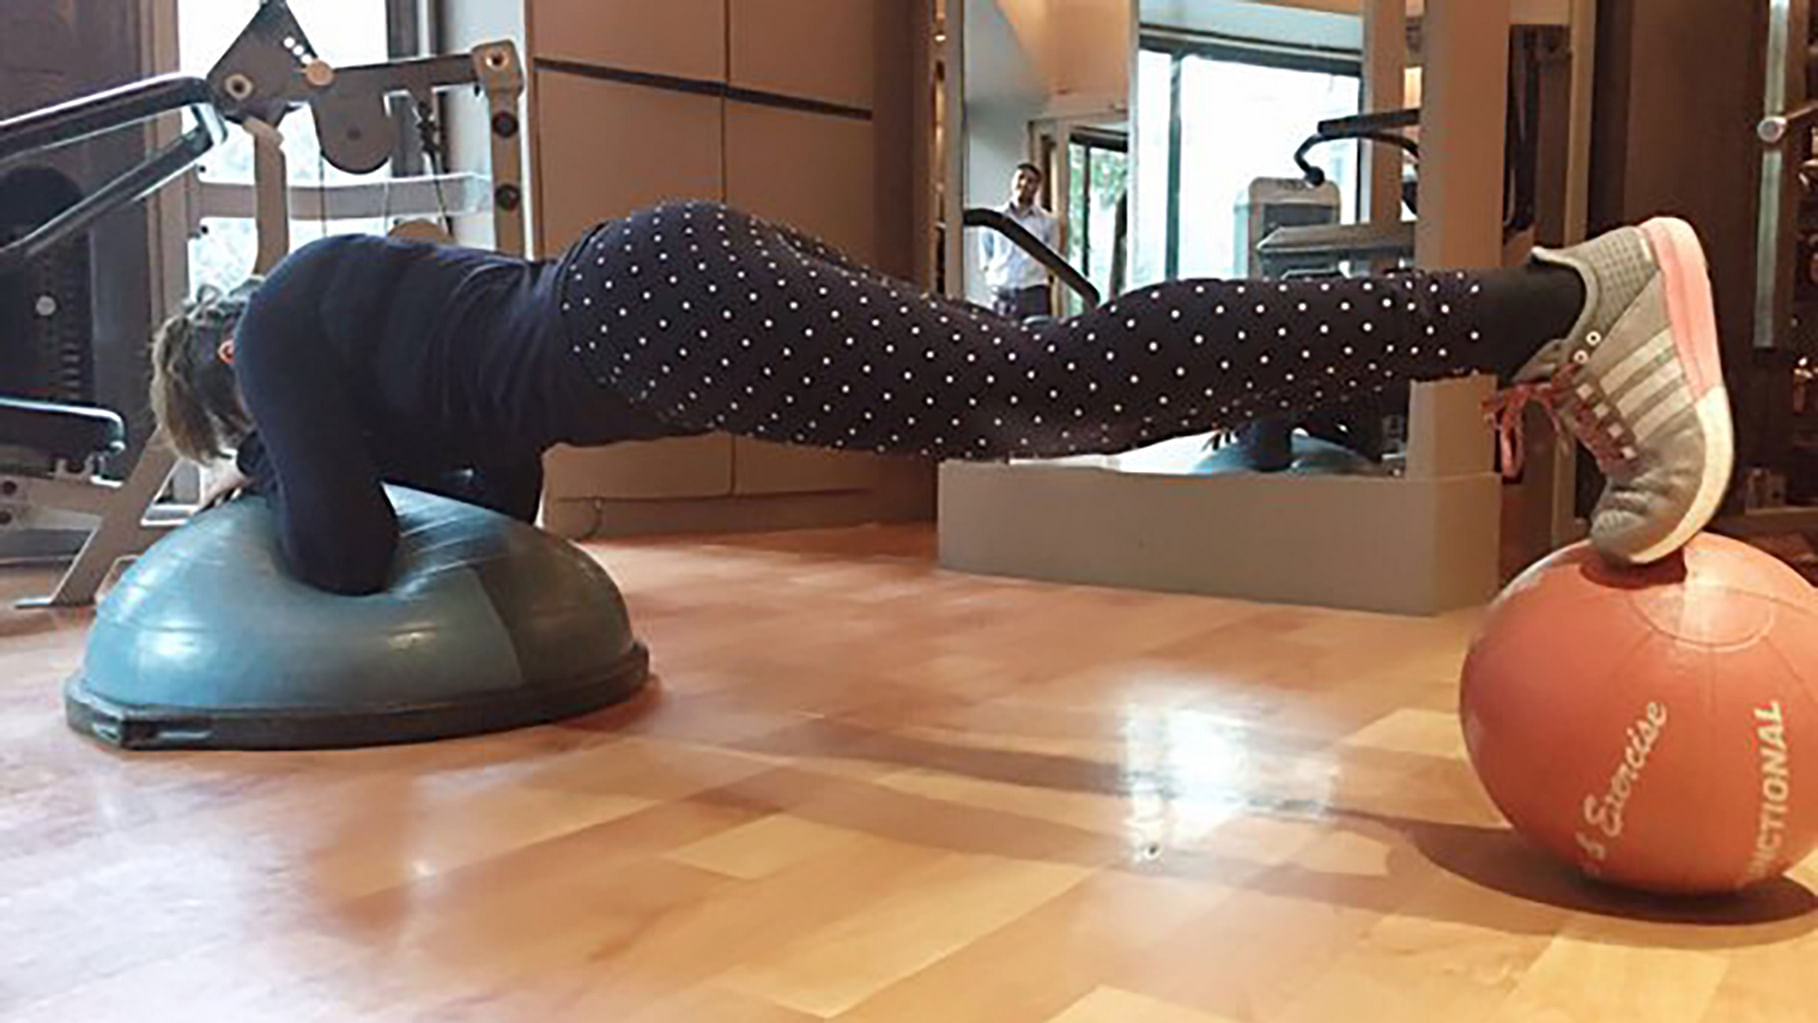 Sunny Leone accepted the ‘Plank off’ challenge. (Photo: <a href="https://twitter.com/SunnyLeone/status/705250002155630592">Twitter</a>)